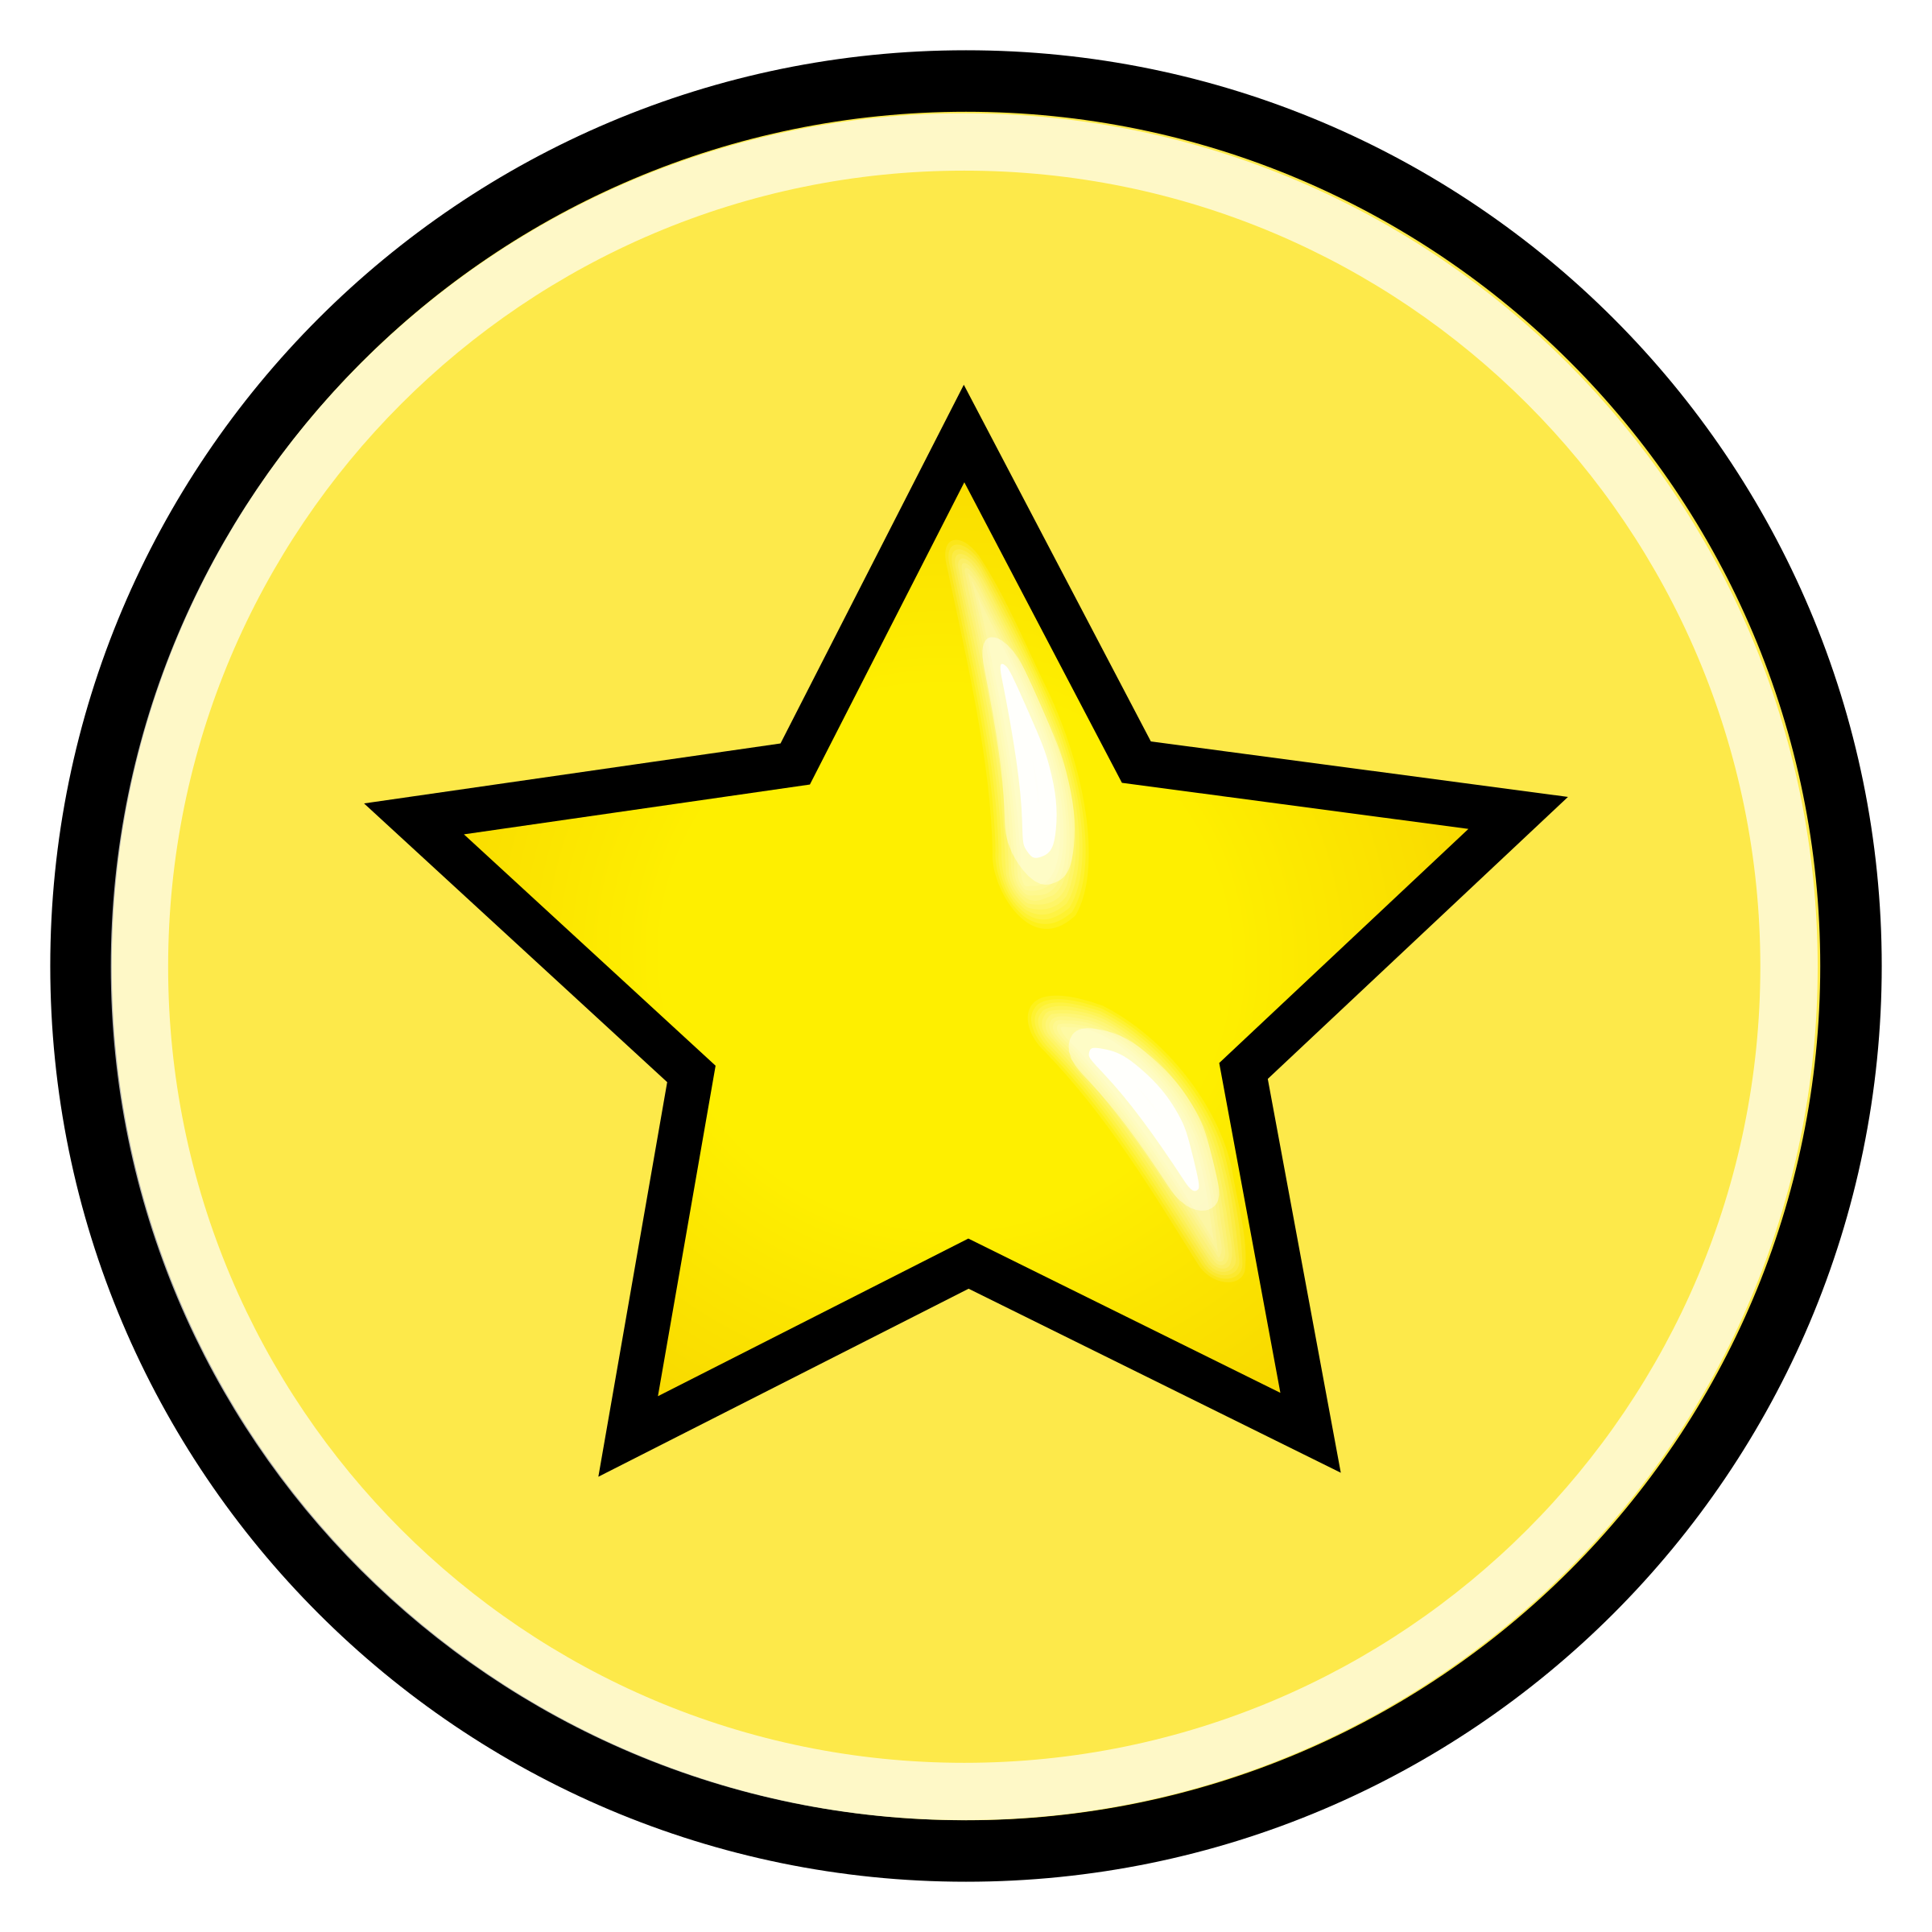 Download Button With Yellow Star Vector Clipart image - Free stock photo - Public Domain photo - CC0 Images